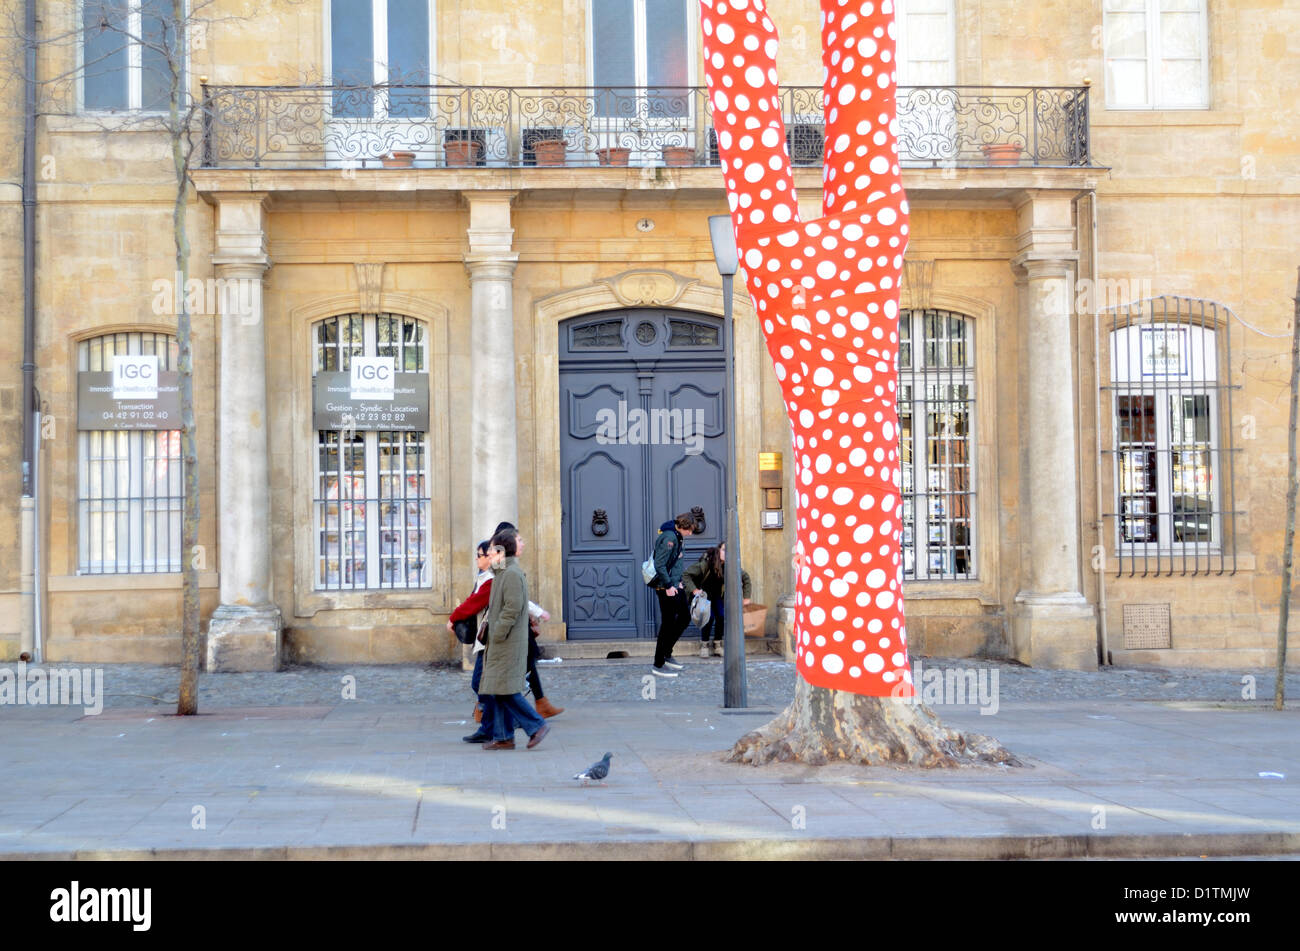 Pedestrians Walk Past a Hotel Particulier or Bourgeois Town House and Wrapped Plane Tree Decorated in Red & White Polka Dot Paper by Japanese Artist Yayoi Kusama Cours Mirabeau Aix-en-Provence for Inauguration of Marseille-Provence 2013 European Capital of Culture. Provence France Stock Photo